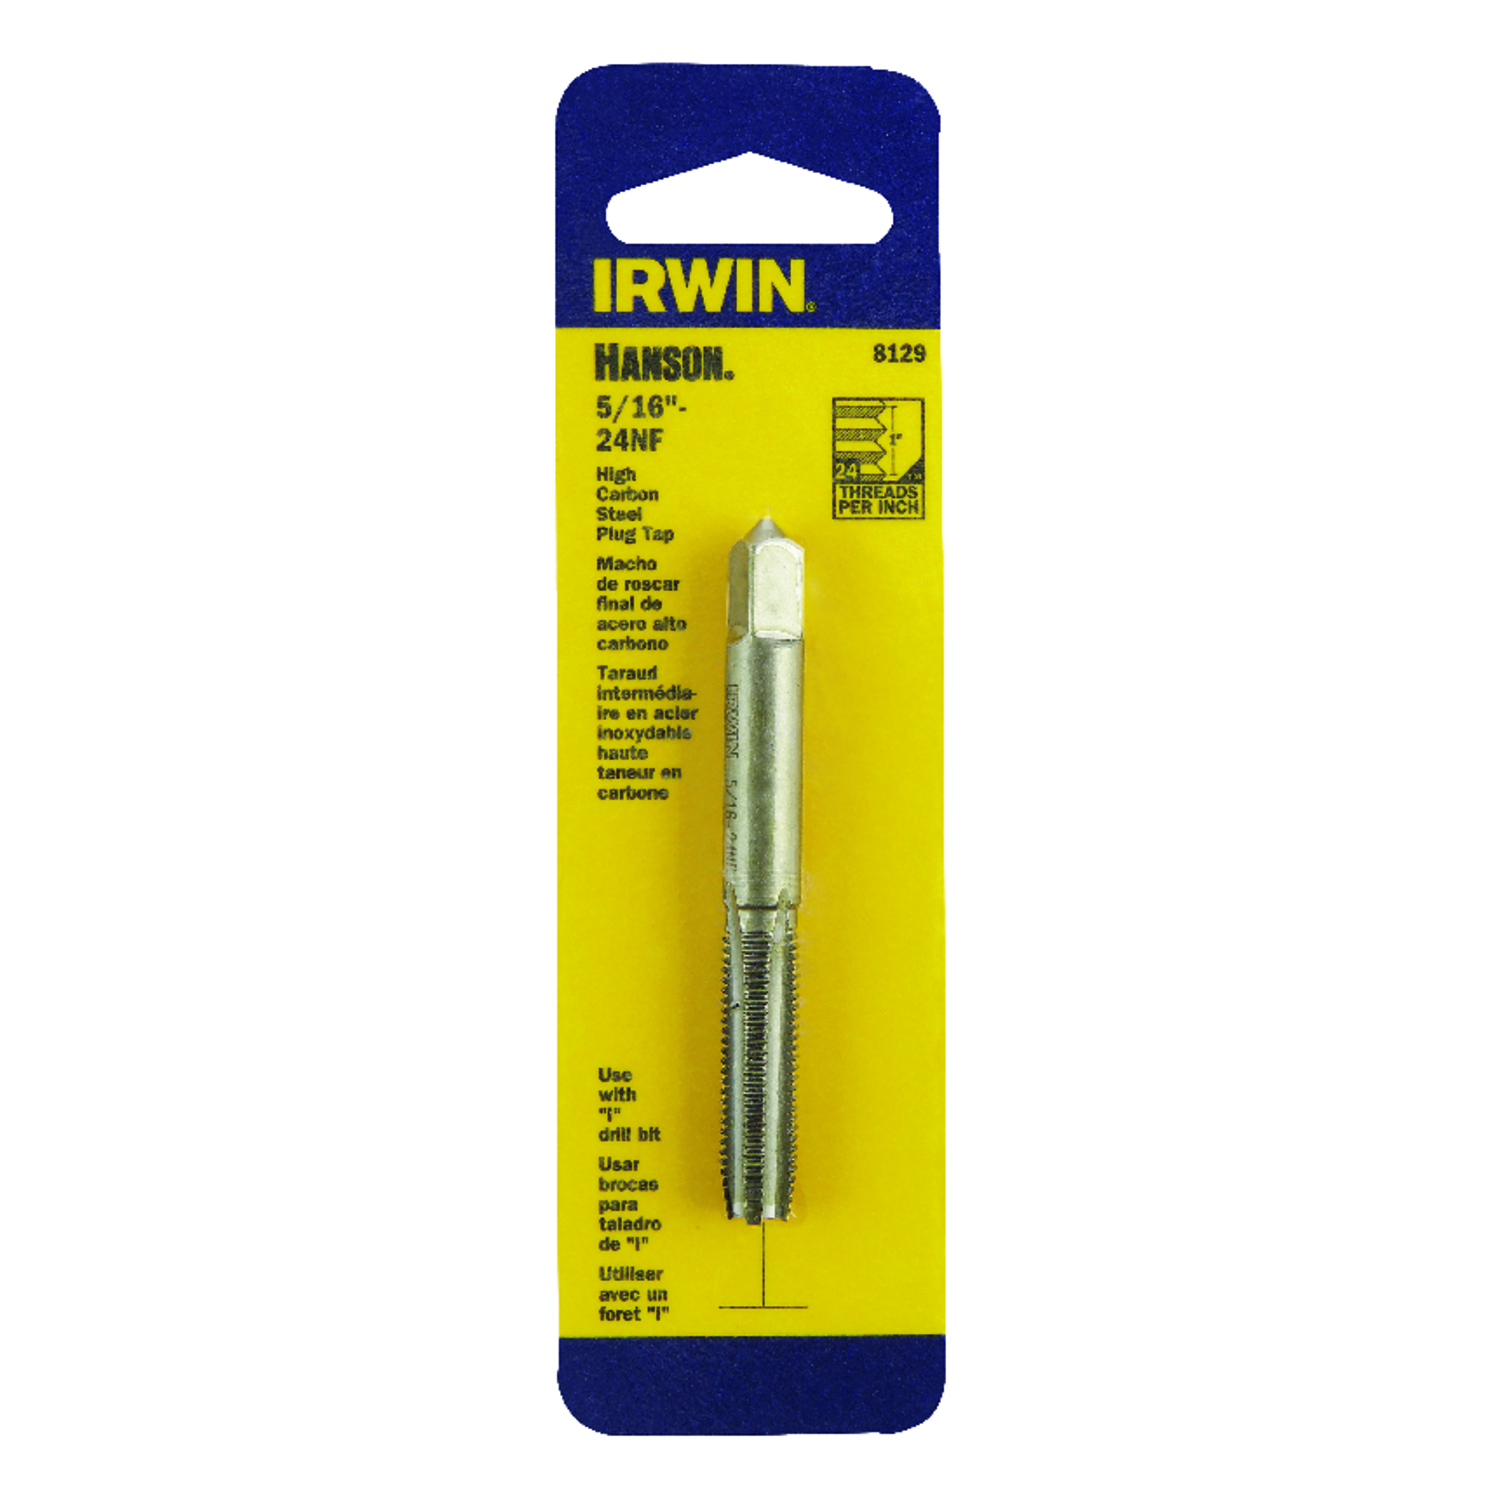 Irwin Hanson High Carbon Steel SAE Fraction Tap 5/16 in. 1 pc